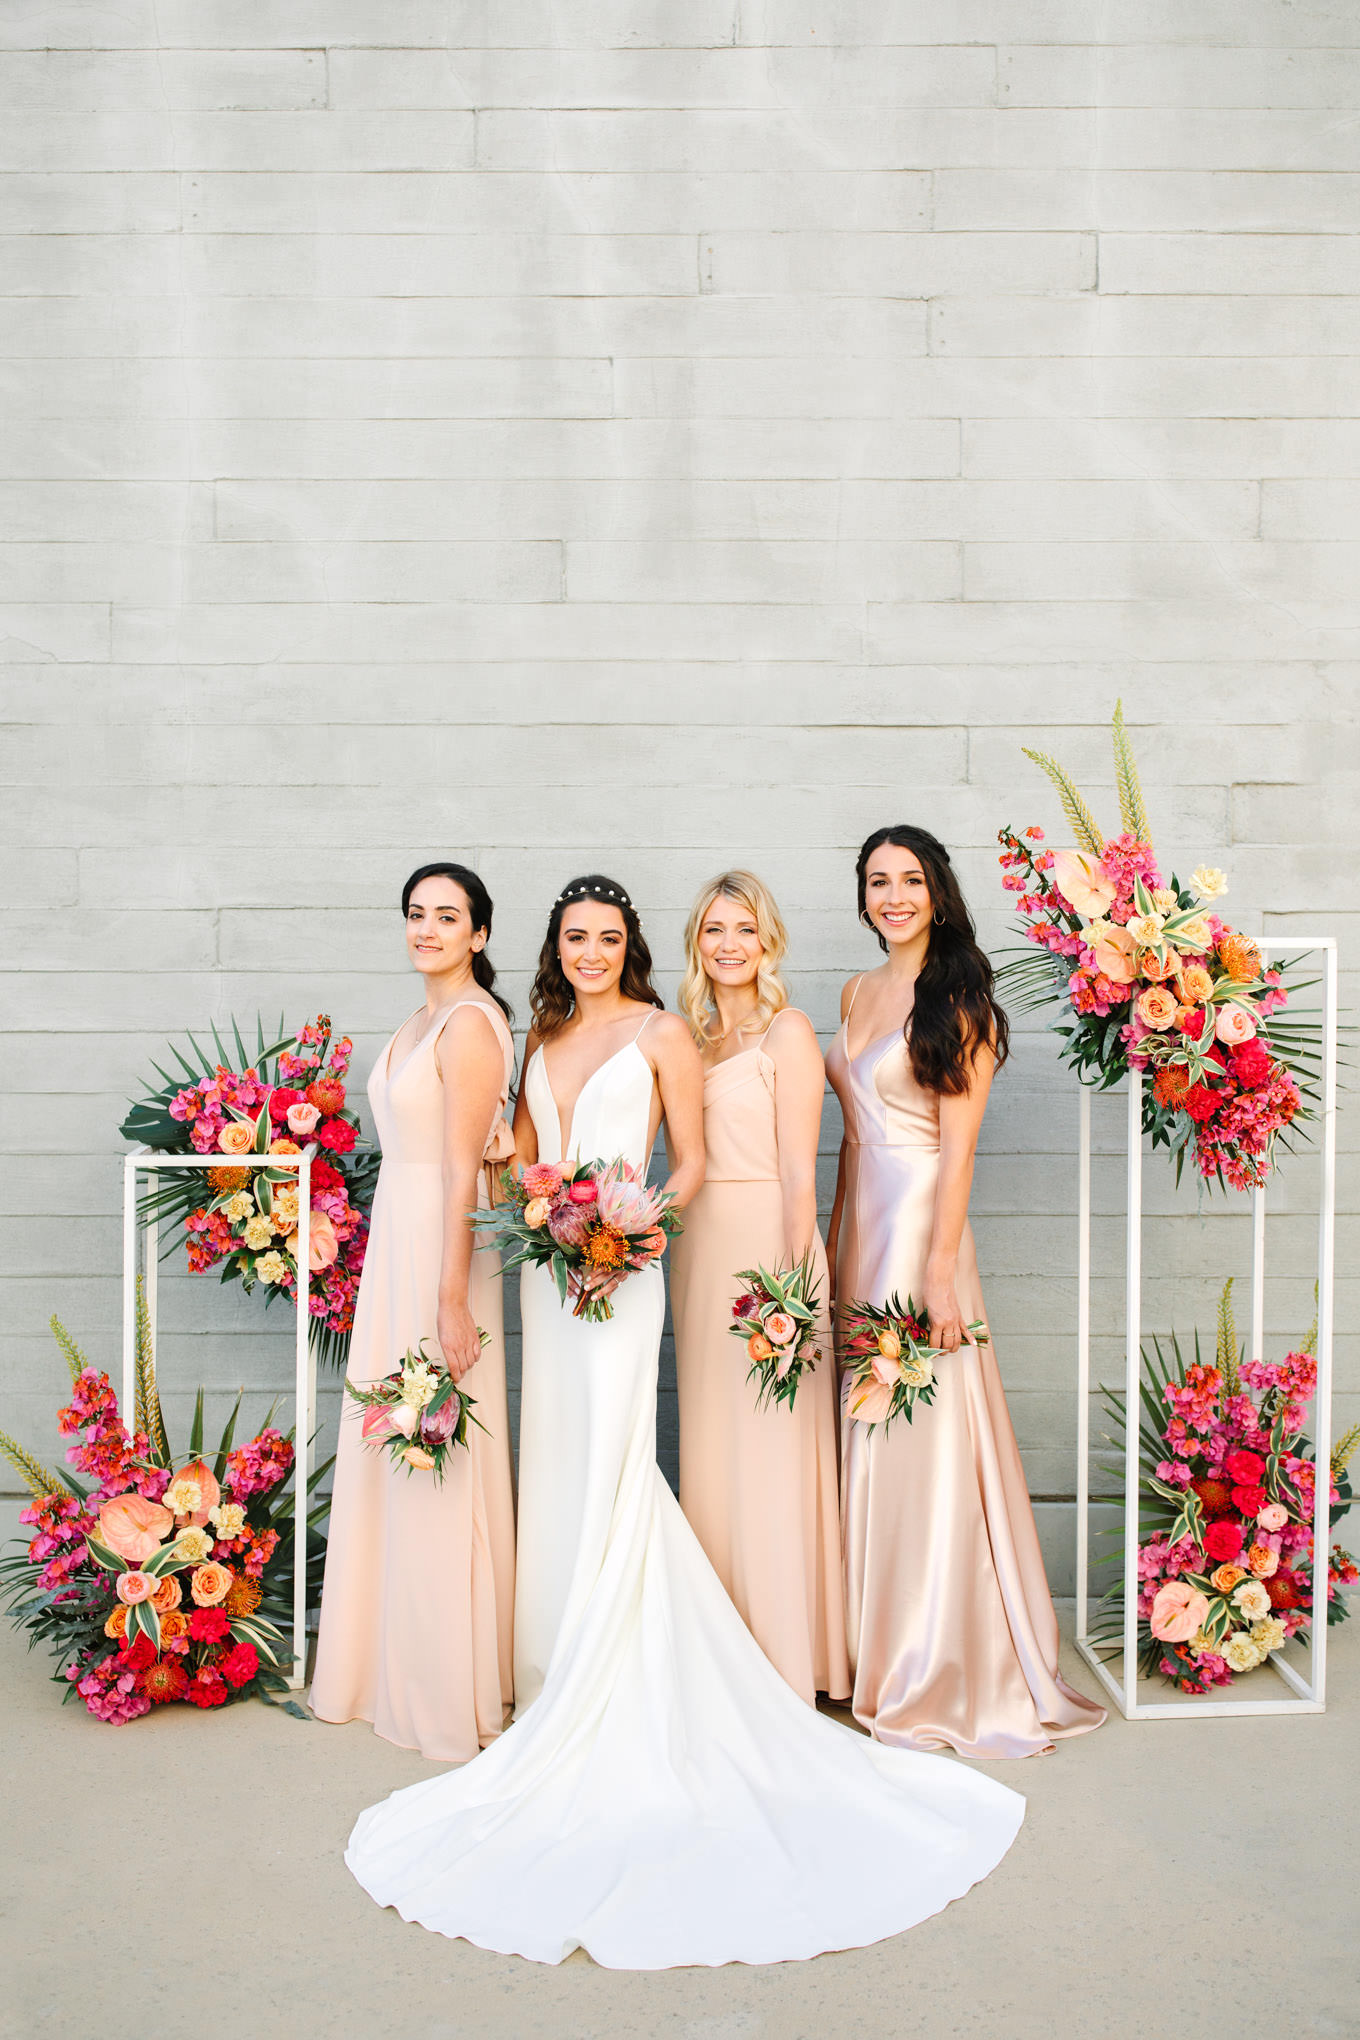 Bridesmaids with tropical floral installations at Malibu micro wedding | Engagement, elopement, and wedding photography roundup of Mary Costa’s favorite images from 2020 | Colorful and elevated photography for fun-loving couples in Southern California | #2020wedding #elopement #weddingphoto #weddingphotography #microwedding   Source: Mary Costa Photography | Los Angeles